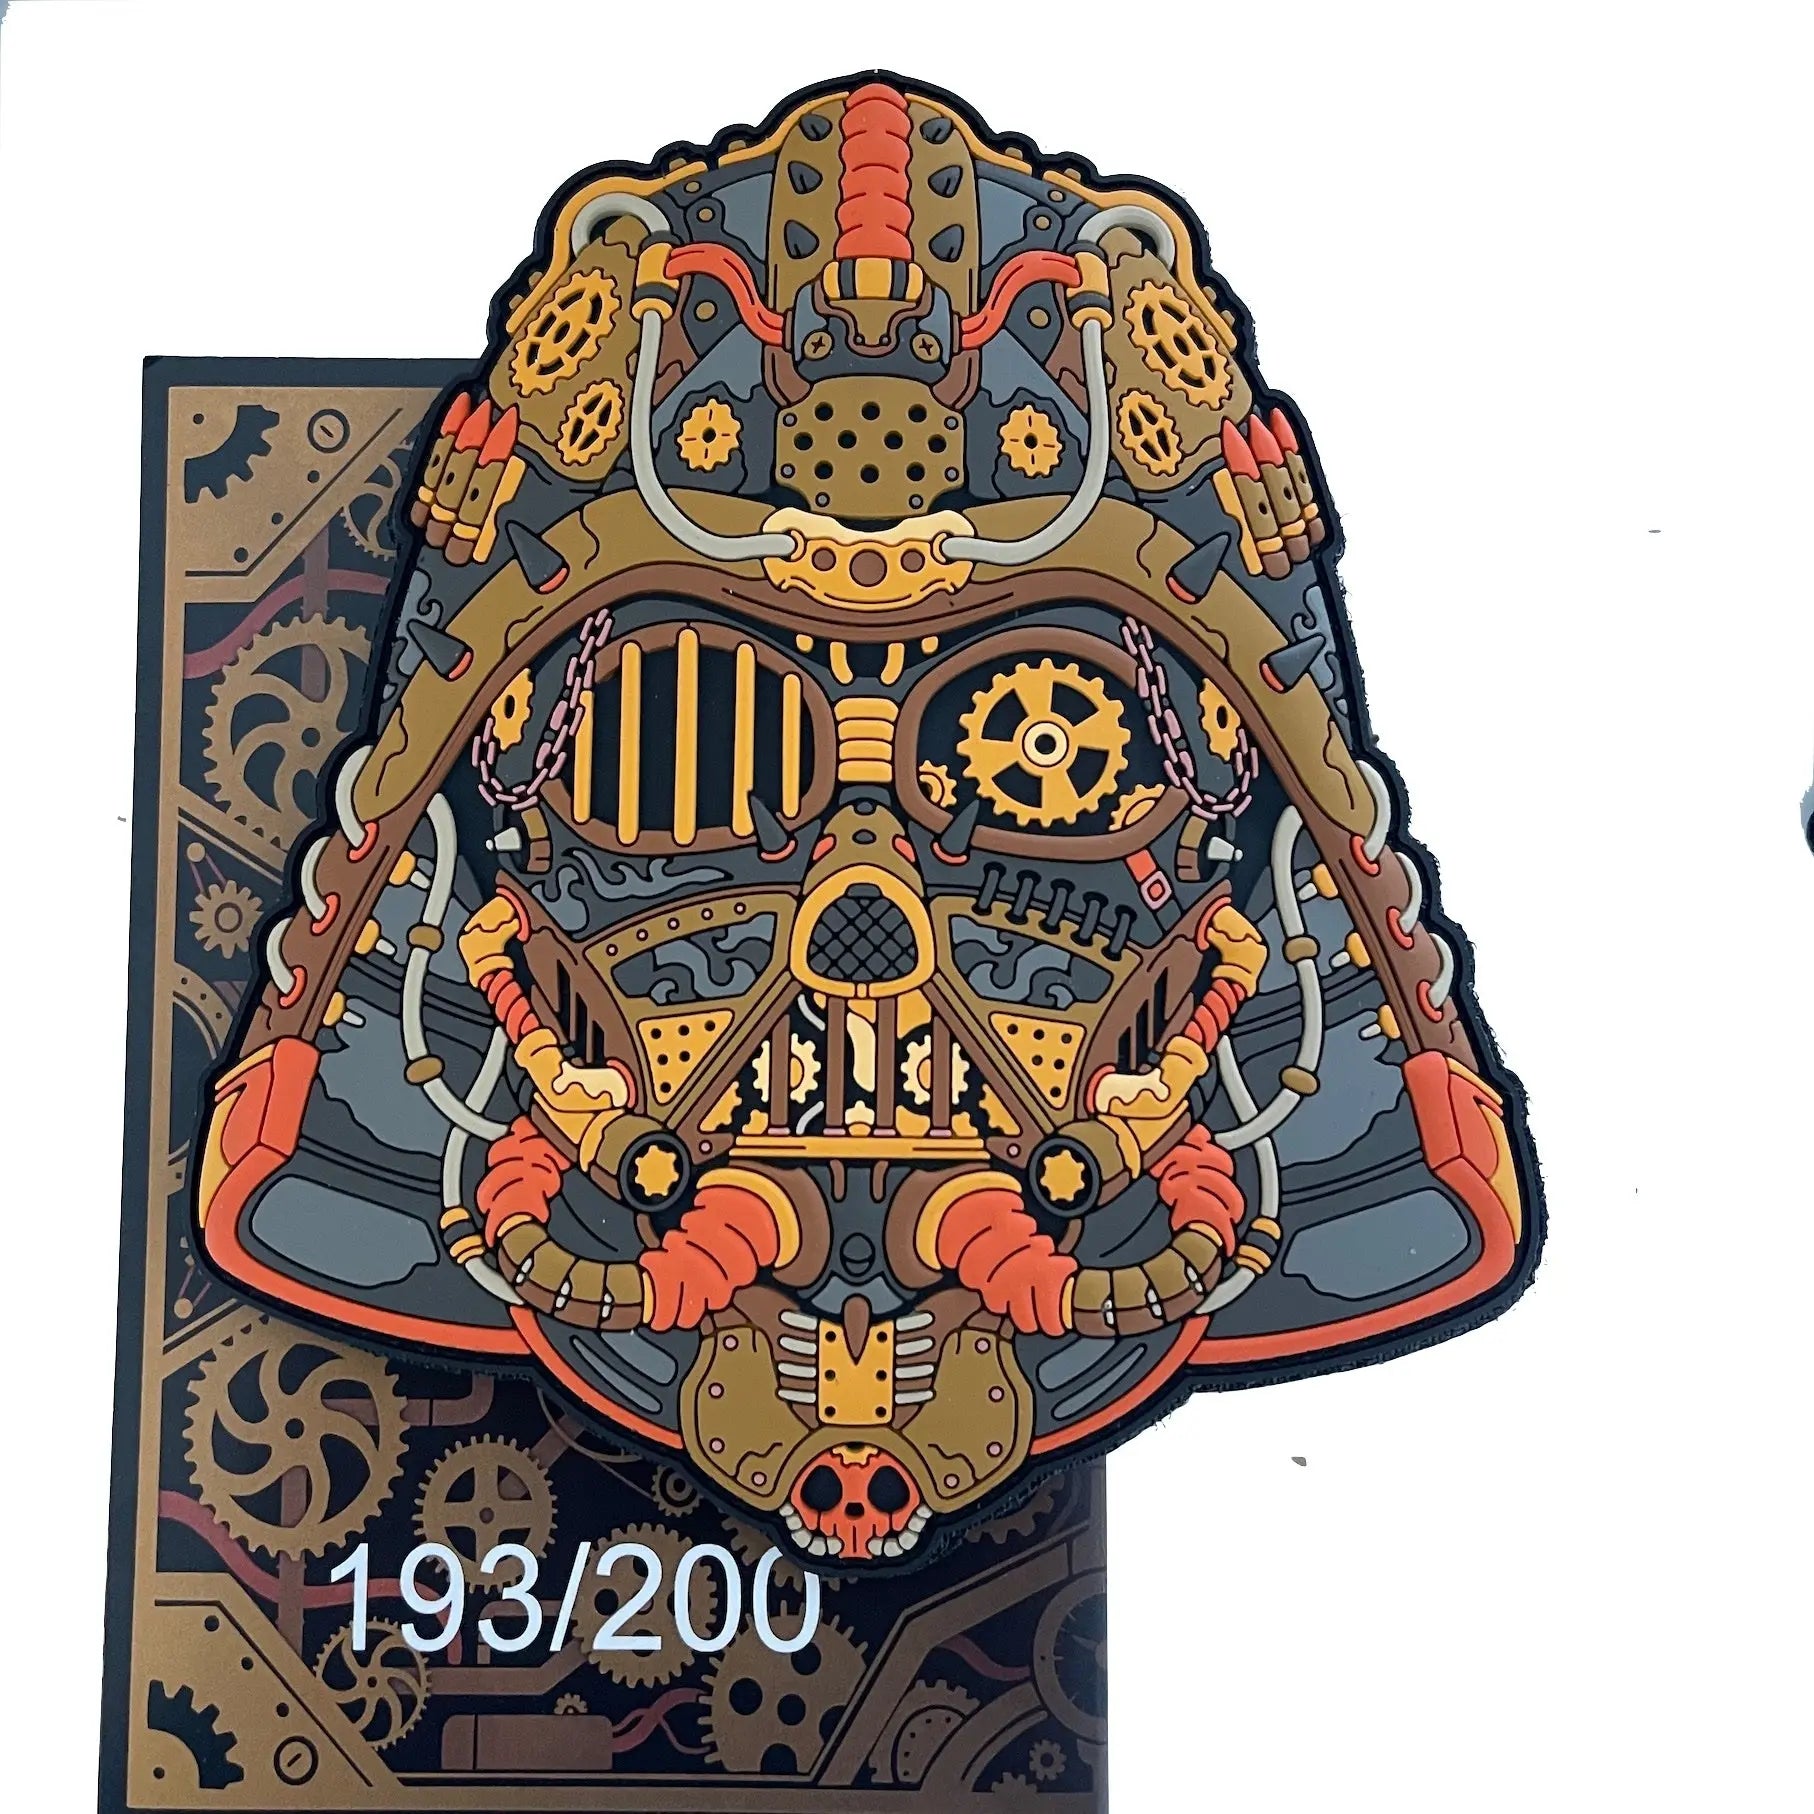 STEAMPUNK #3 PATCHLAB